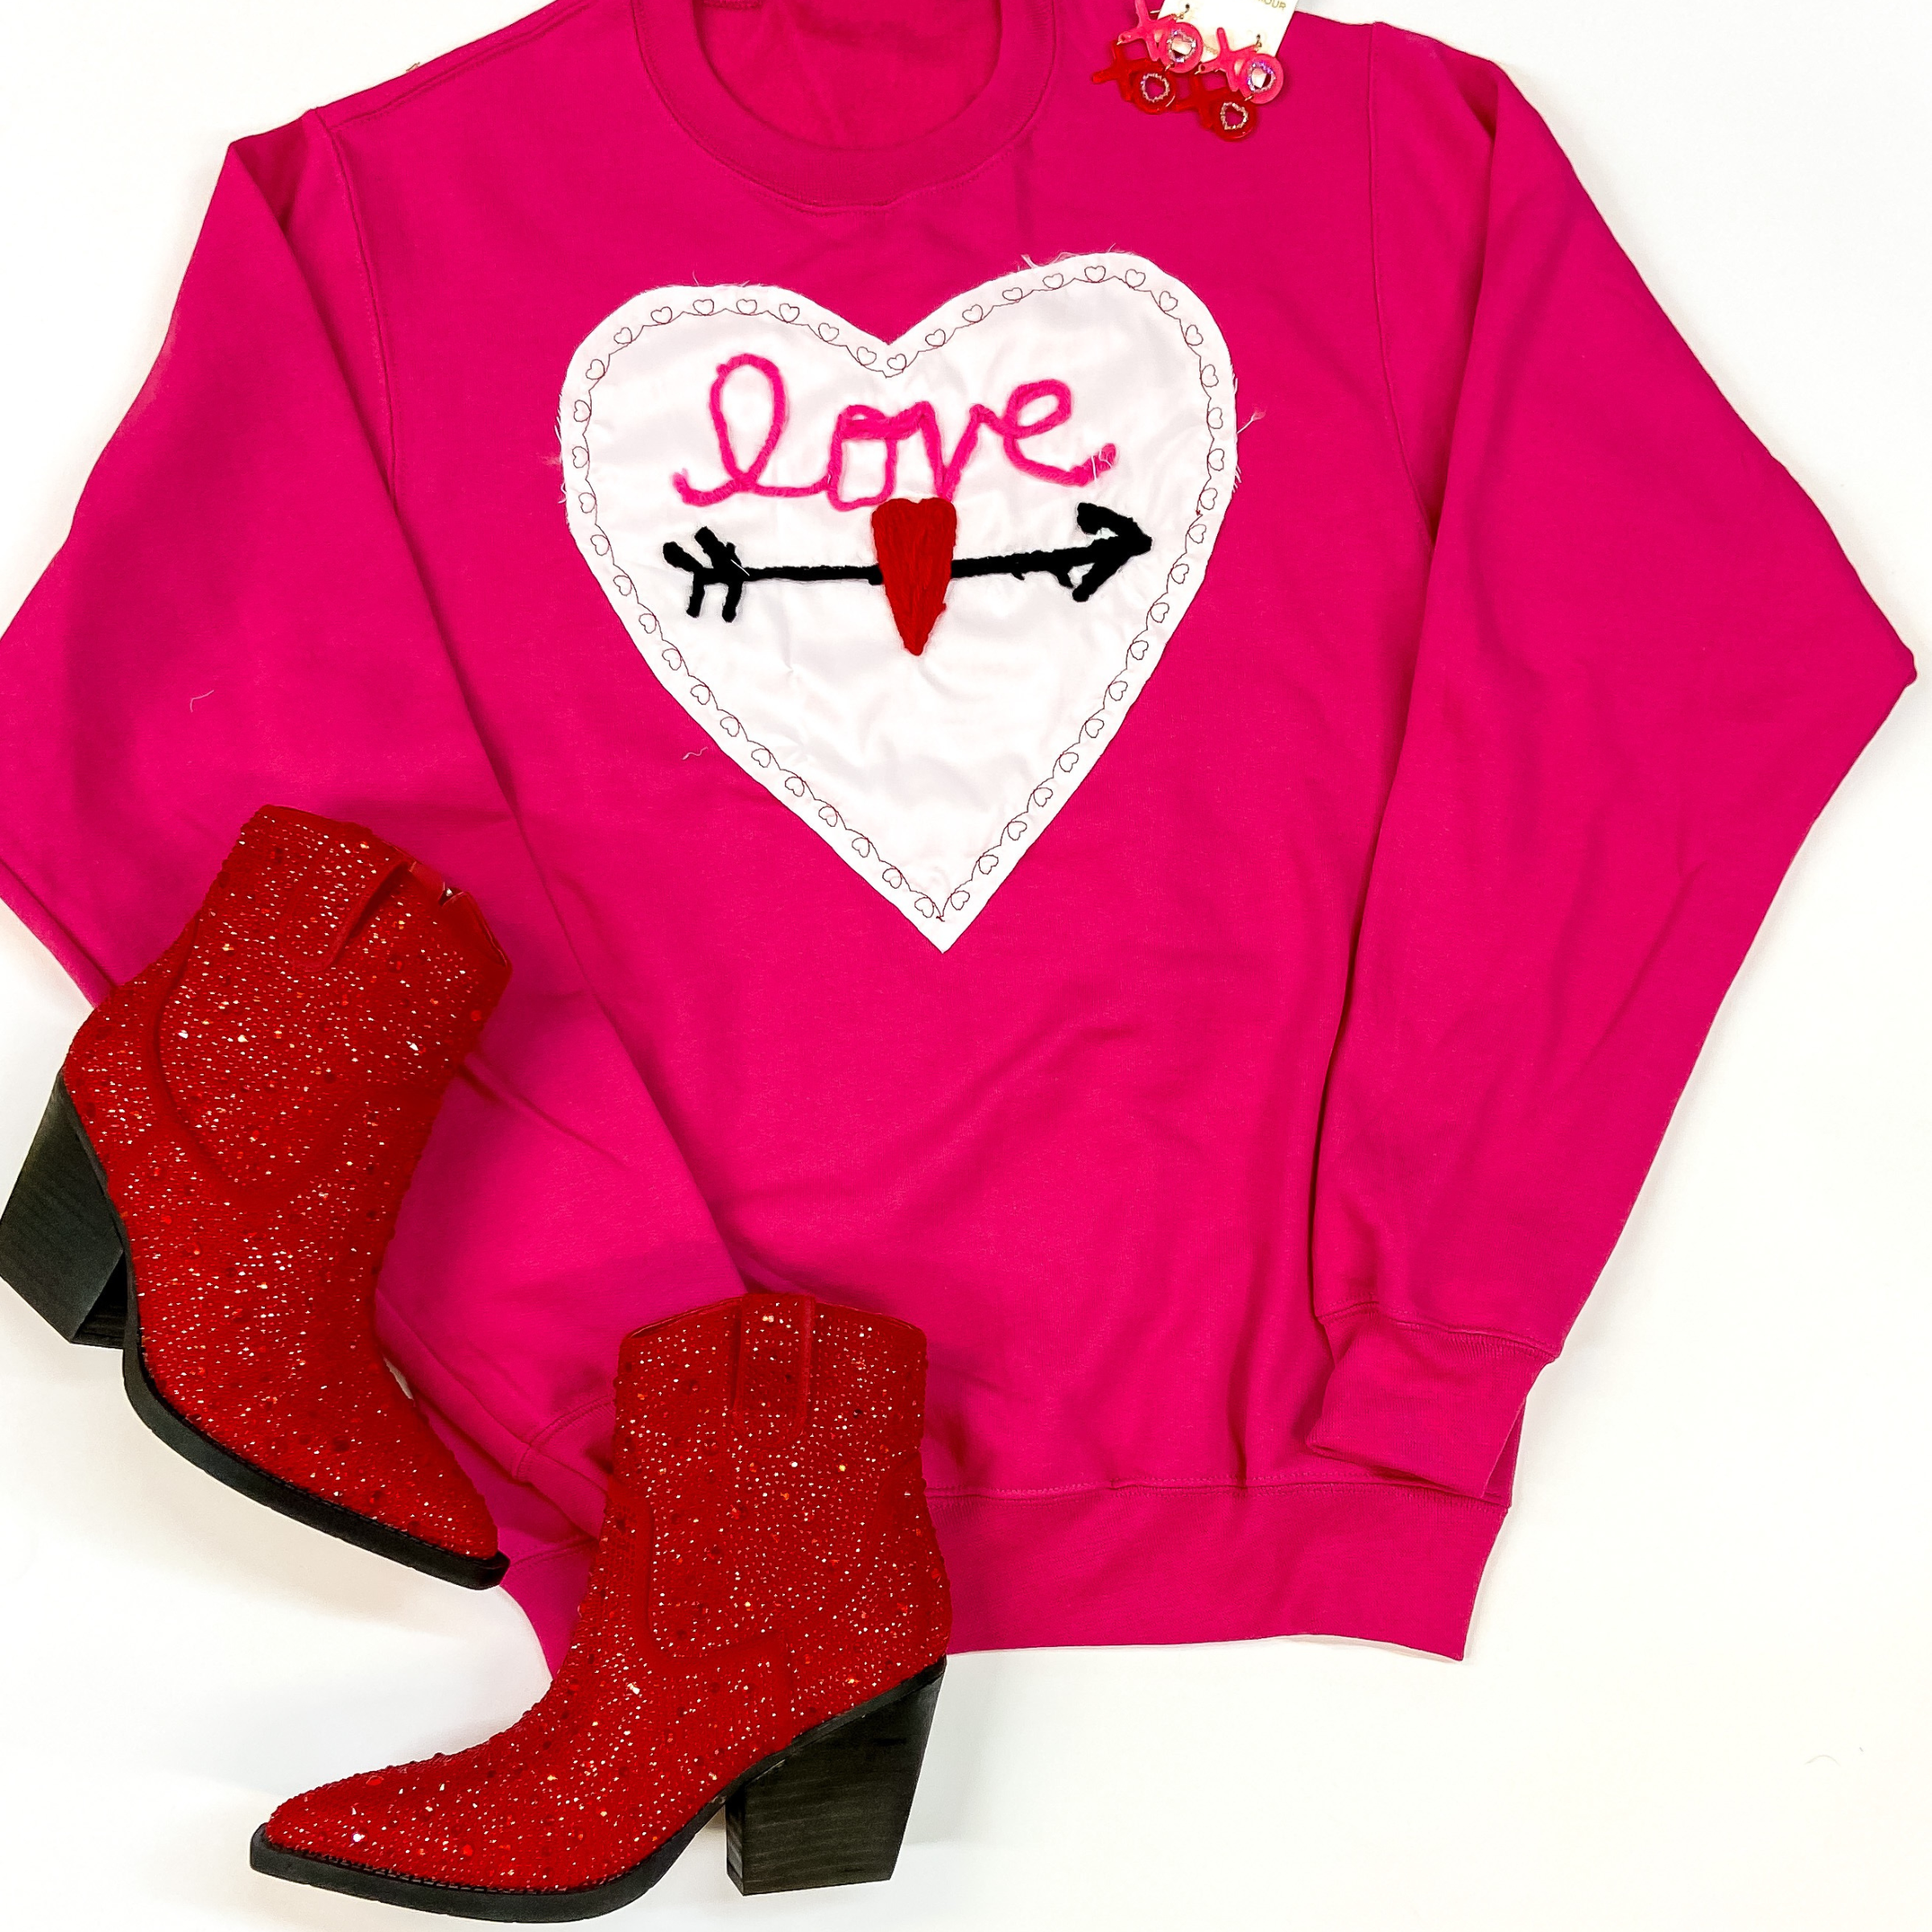 A hot pink graphic sweatshir lays in the middle of the picture with a crocheted heart in the middle of it with "LOVE" written inside the heart. Red sparkly boots lay to the left of the sweatshirt. On an all white background. 